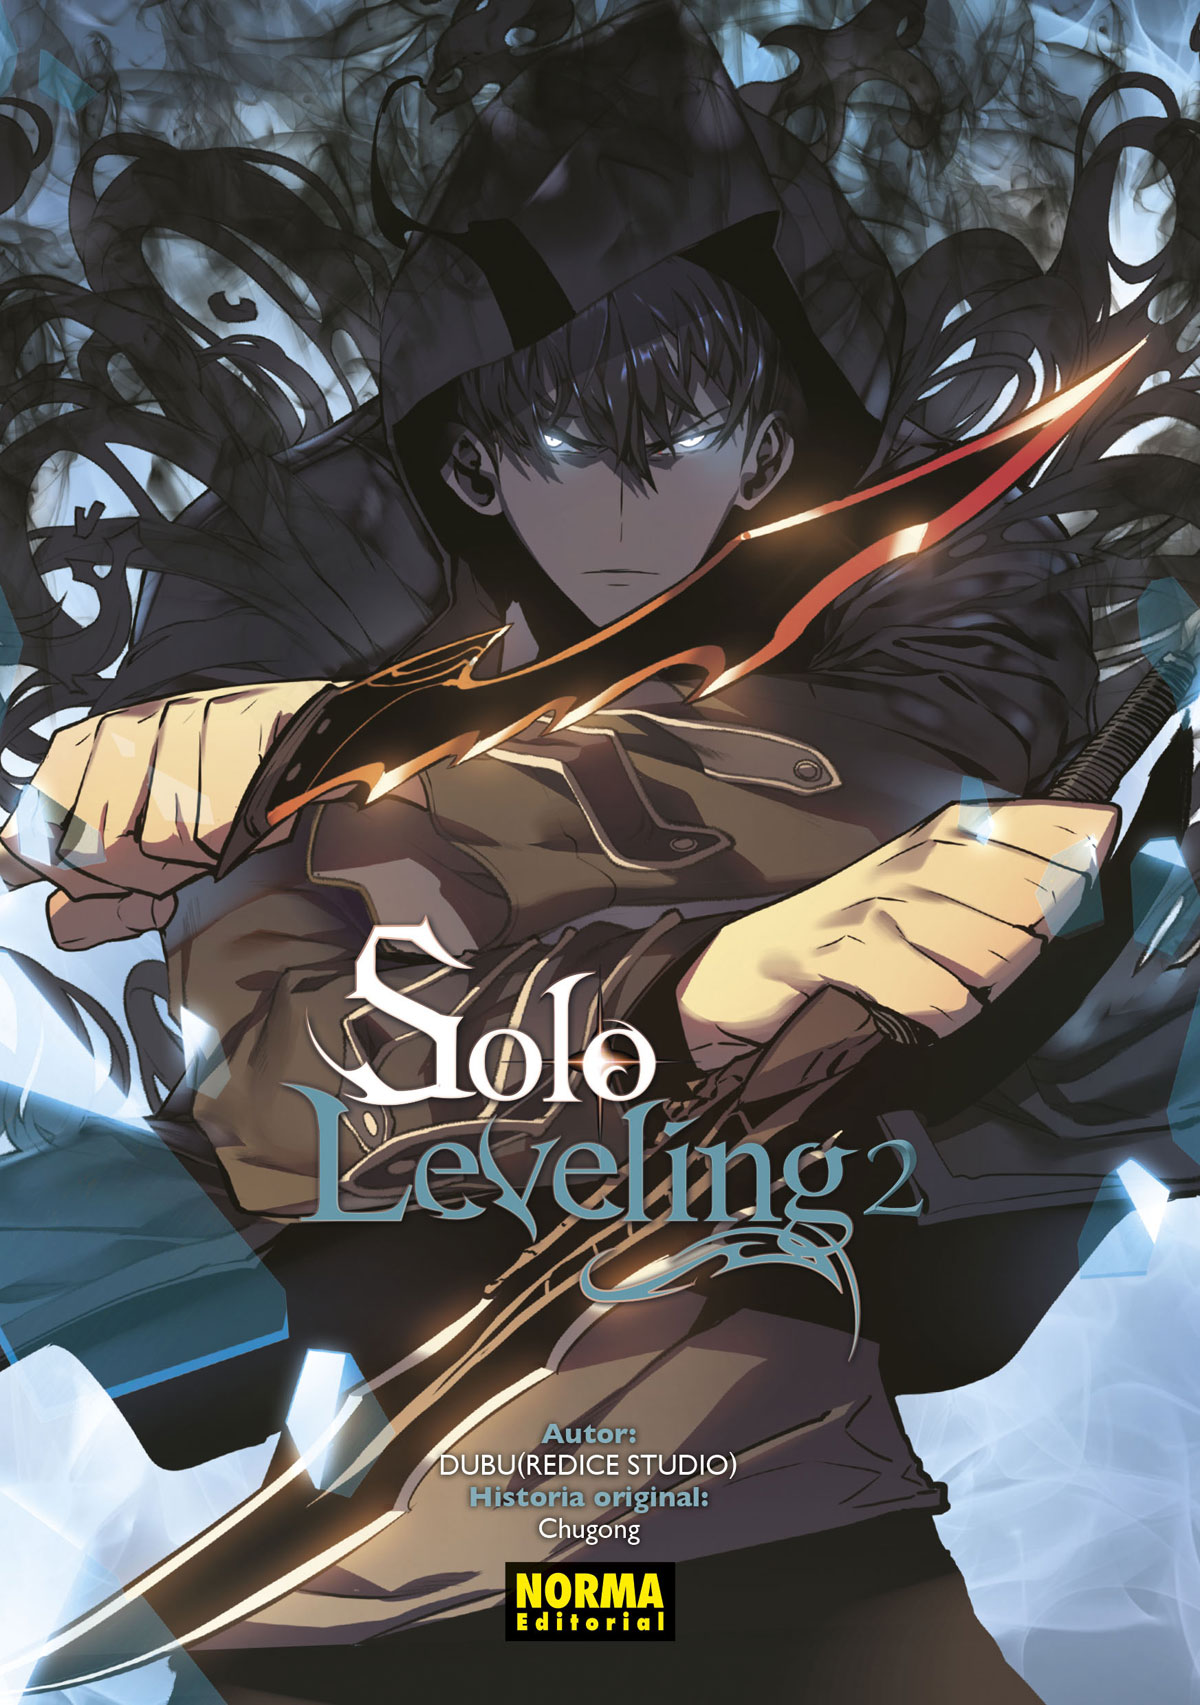 SOLO LEVELING 2 - Norma Editorial